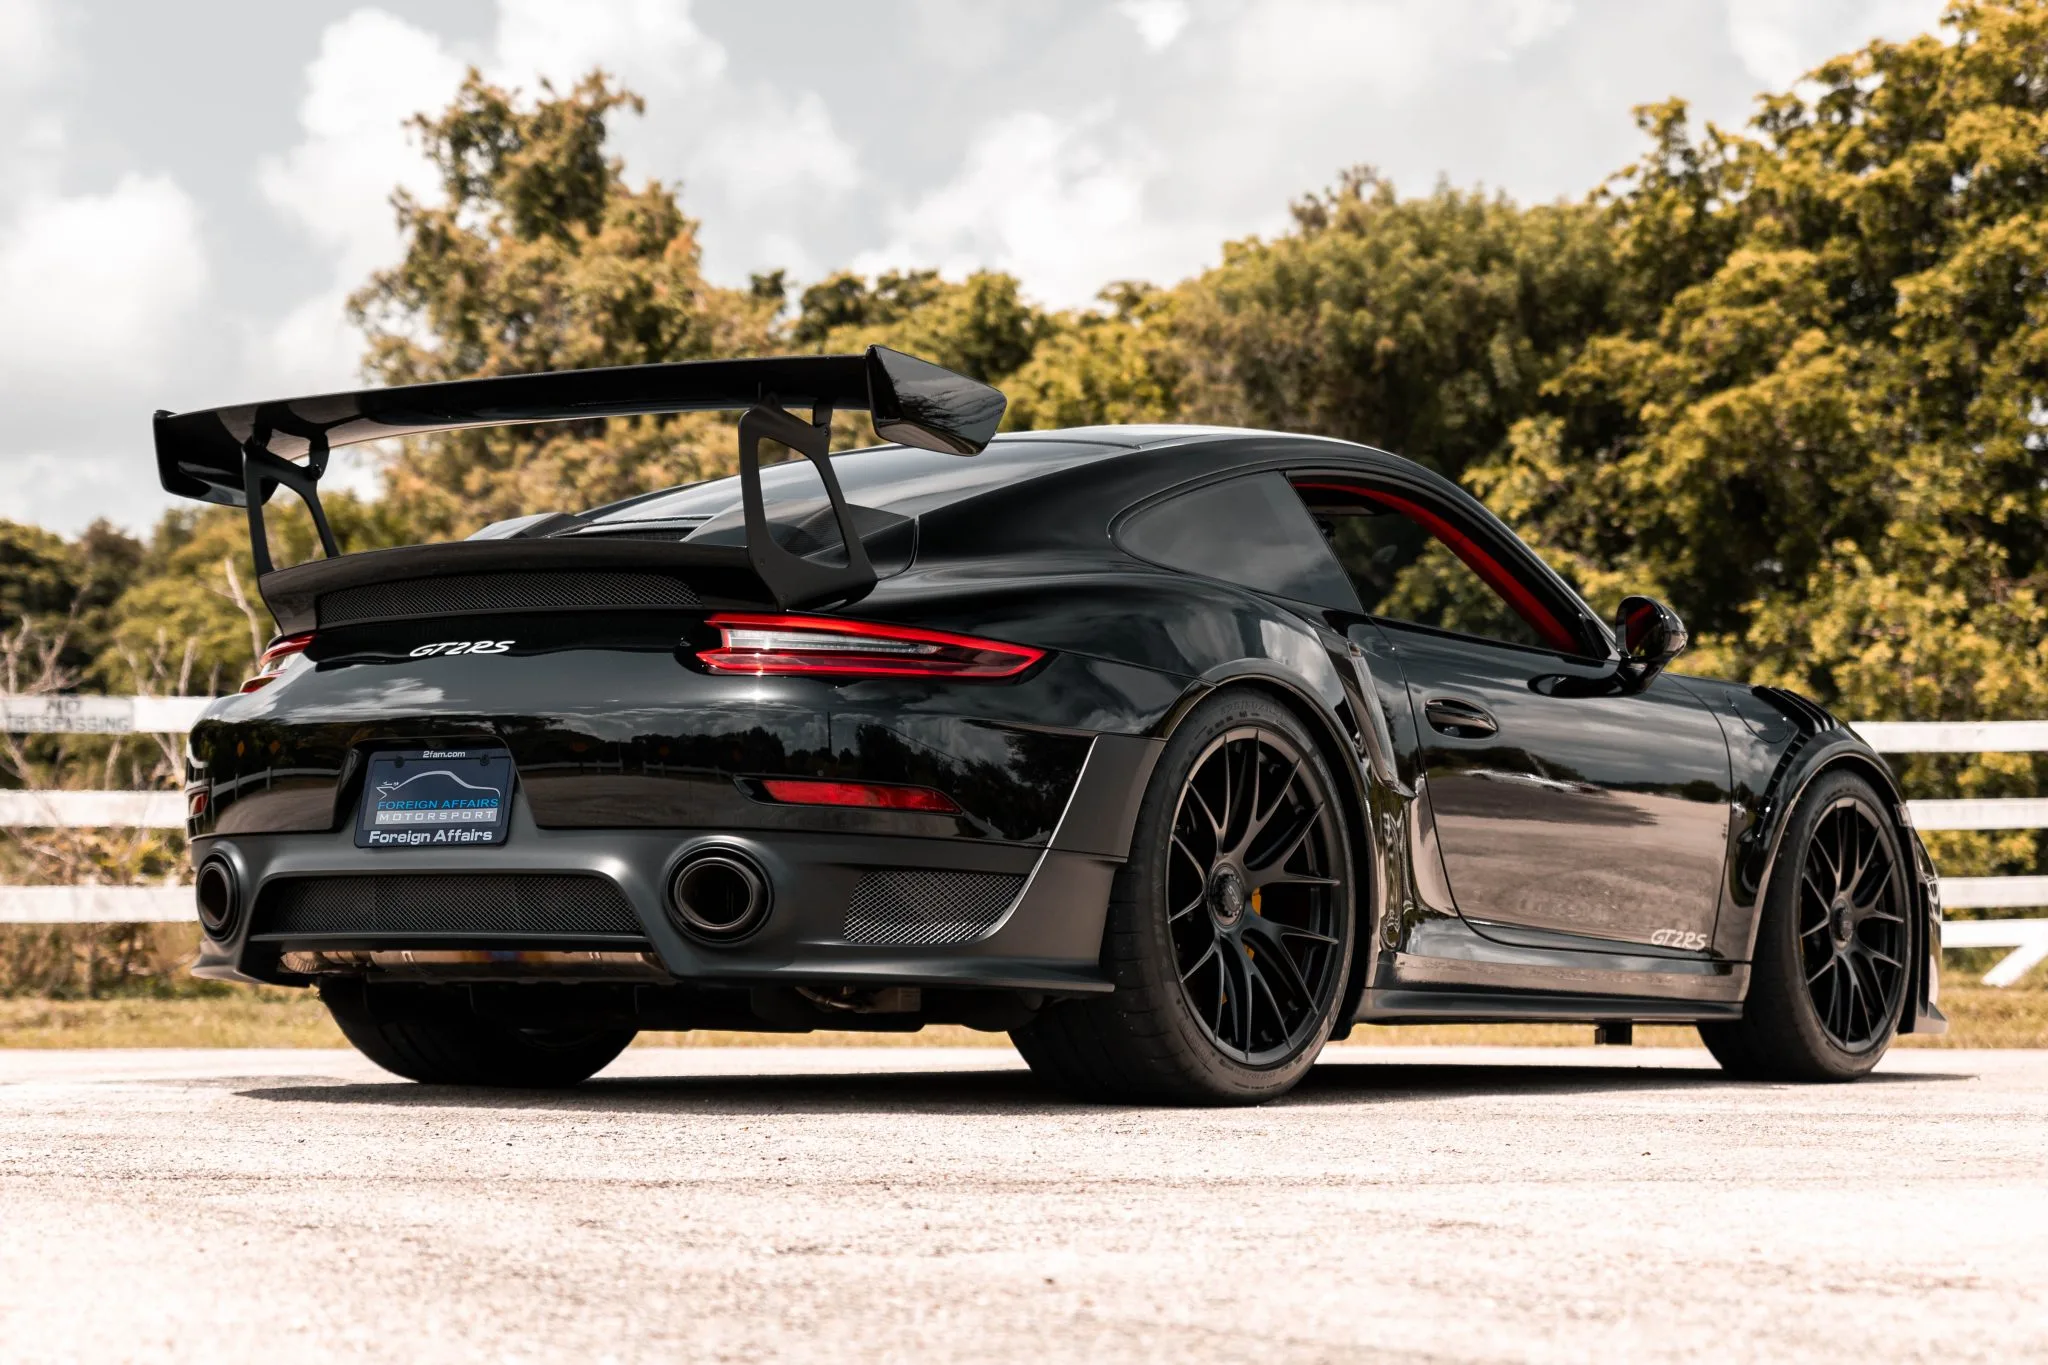 Low Mileage 2018 Porsche 911 GT2 RS Weissach Available For Auction